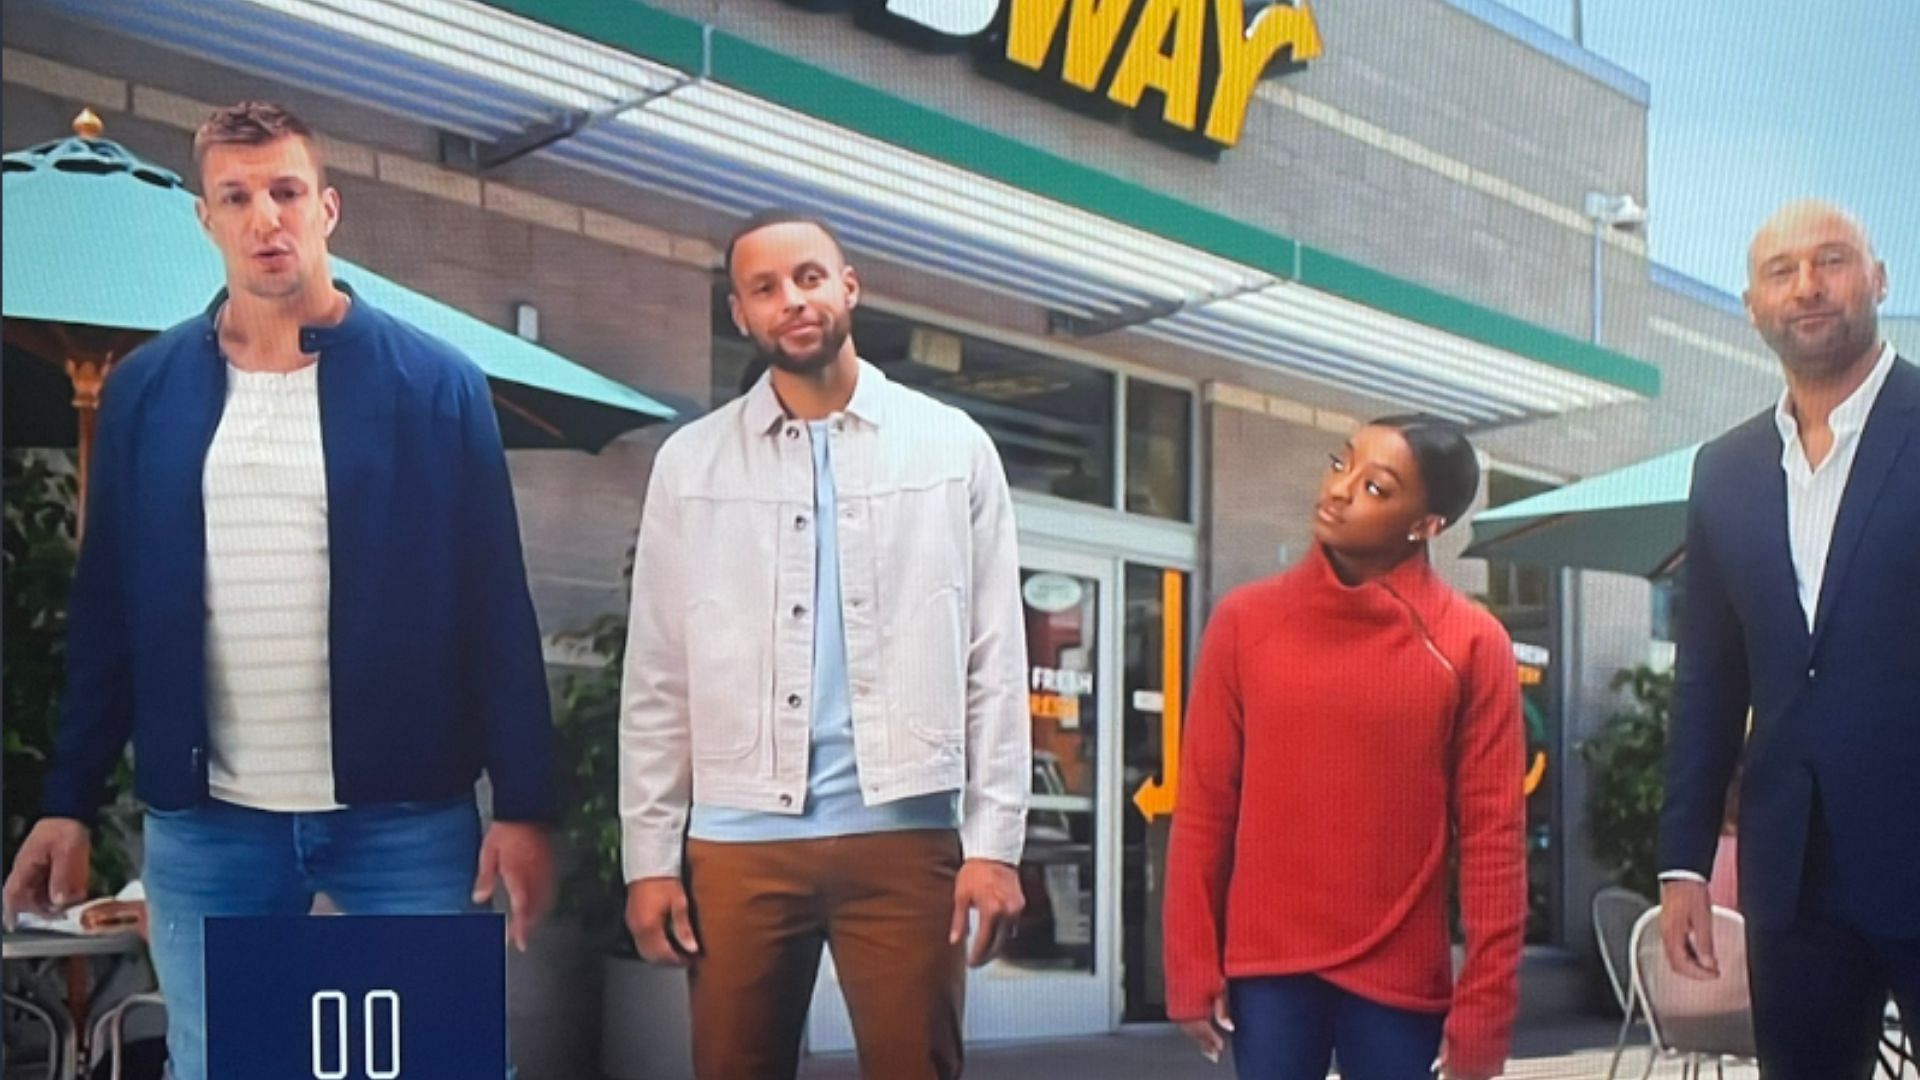 Derek Jeter in the recent Subway commercial with Rob Gronkowski, Stephen Curry, and Simone Biles.